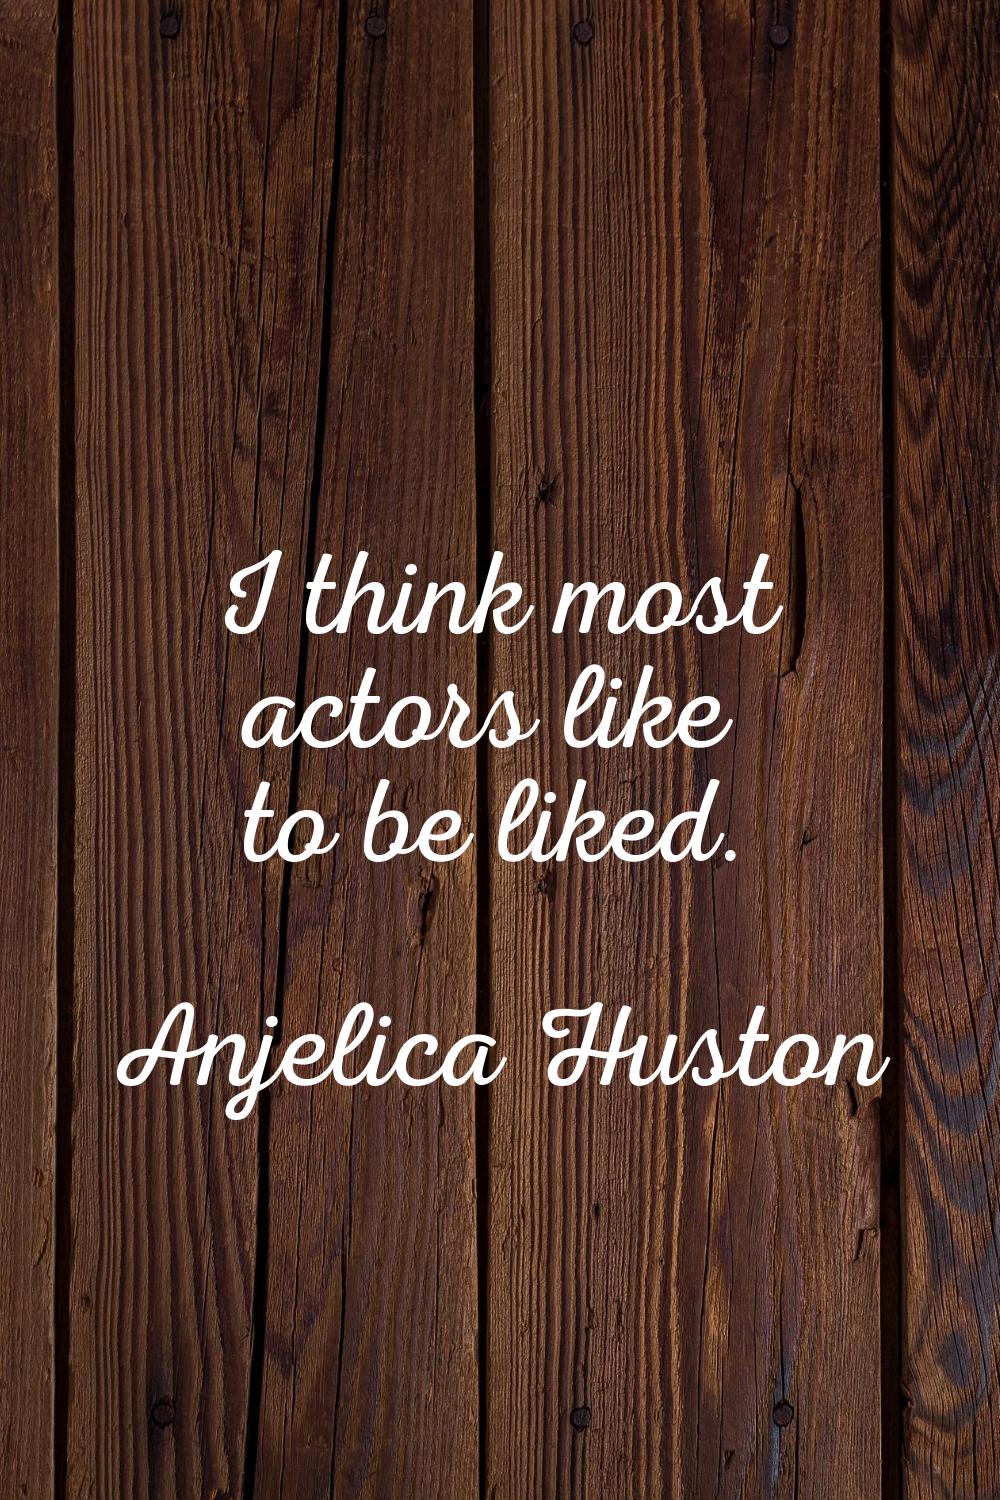 I think most actors like to be liked.